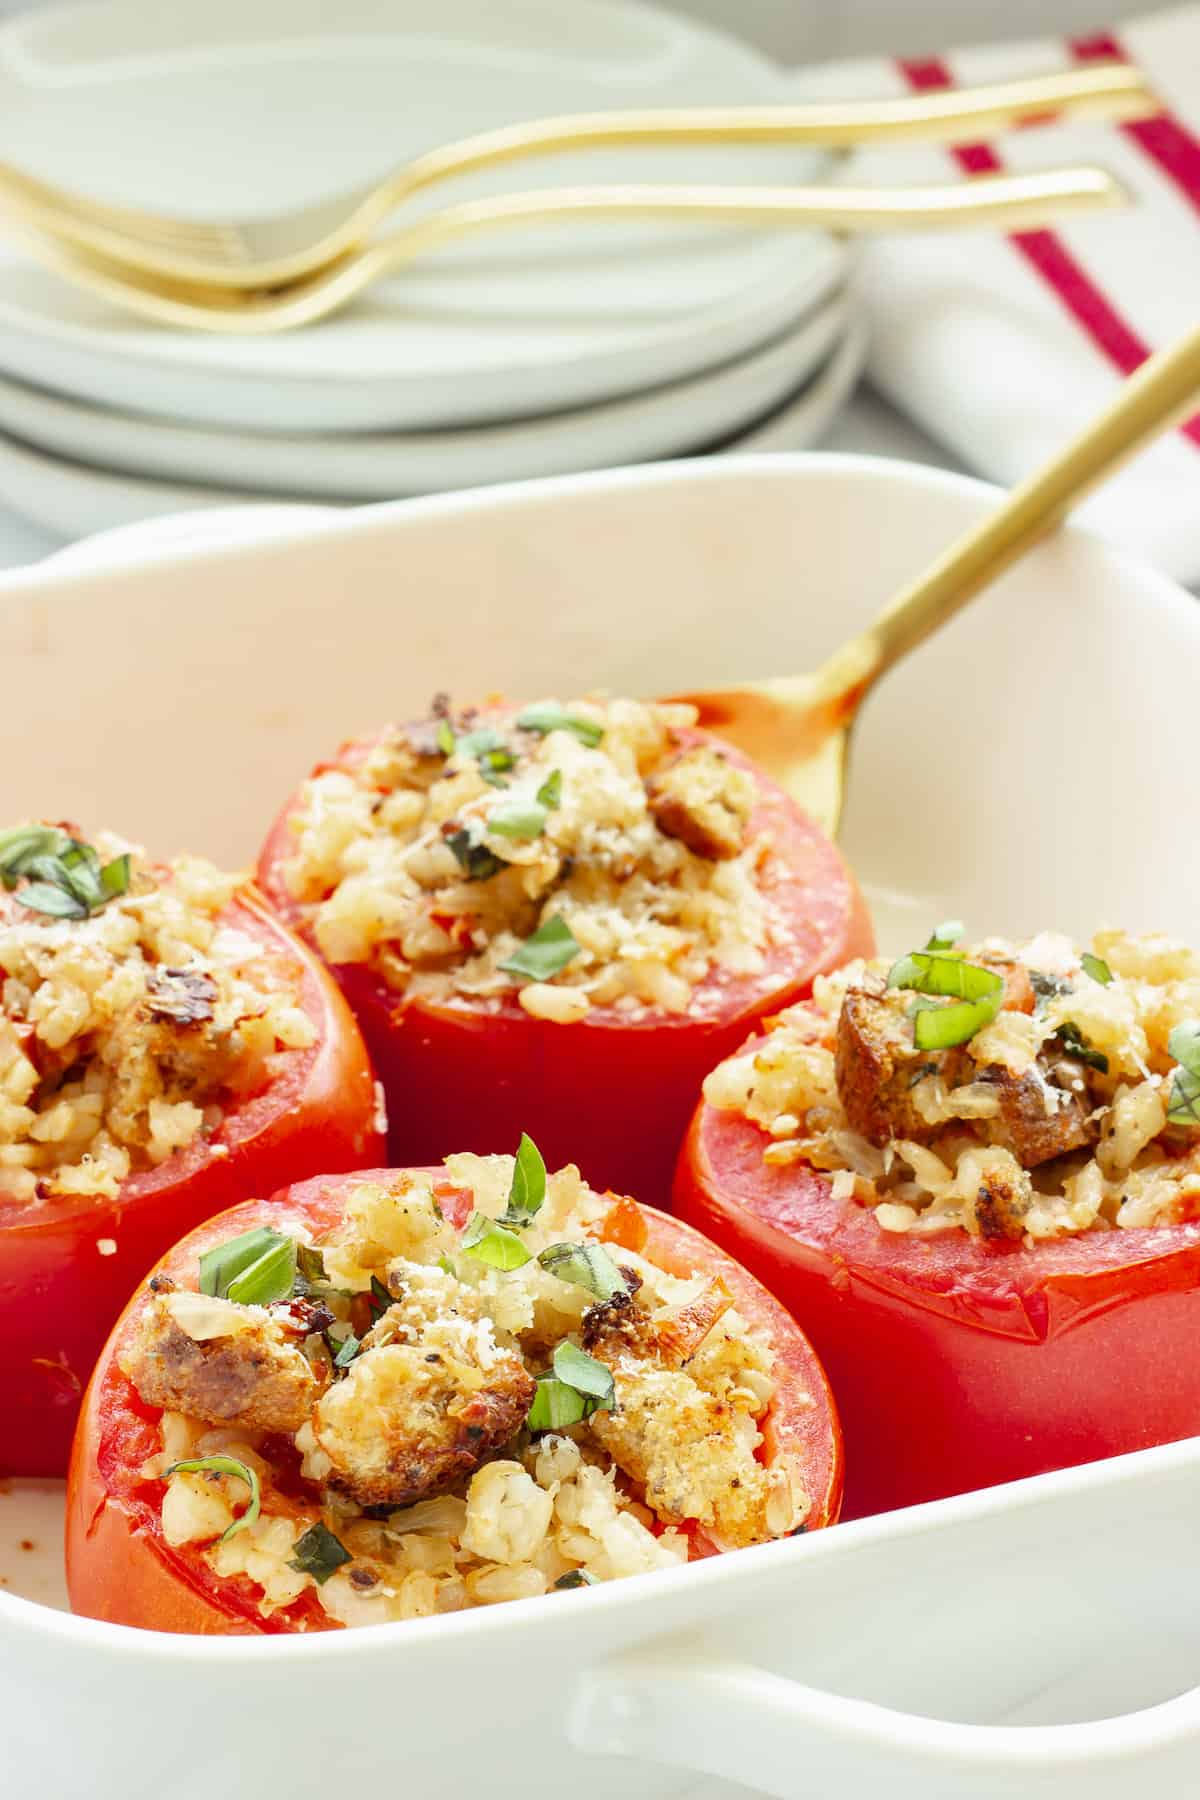 A white casserole dish with 4 baked stuffed tomatoes. A gold serving spoon, forks, and plates in the background.